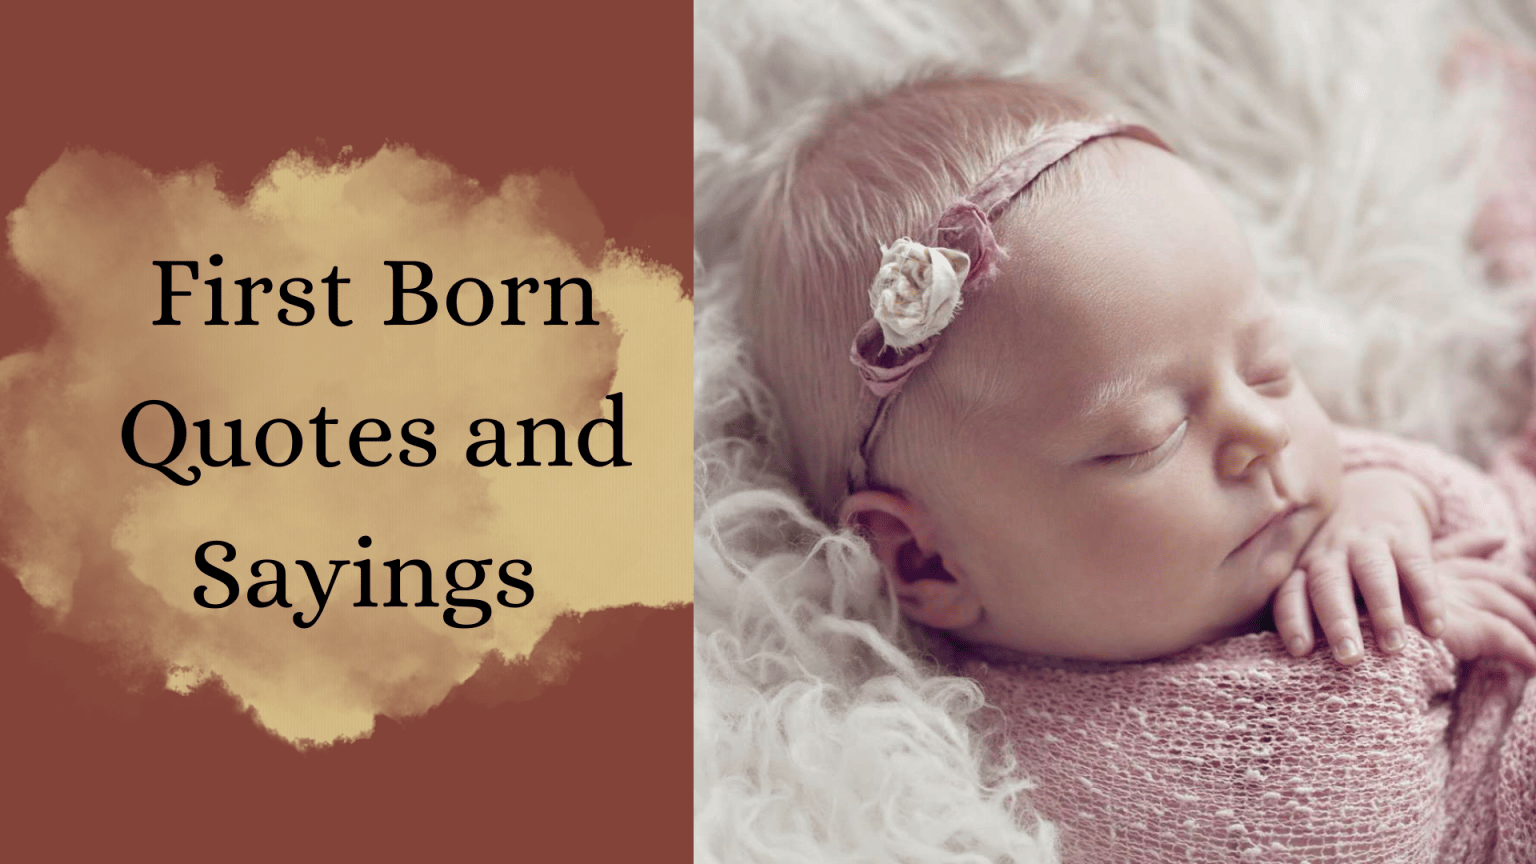 100 first-born quotes & sayings for children - Babylic